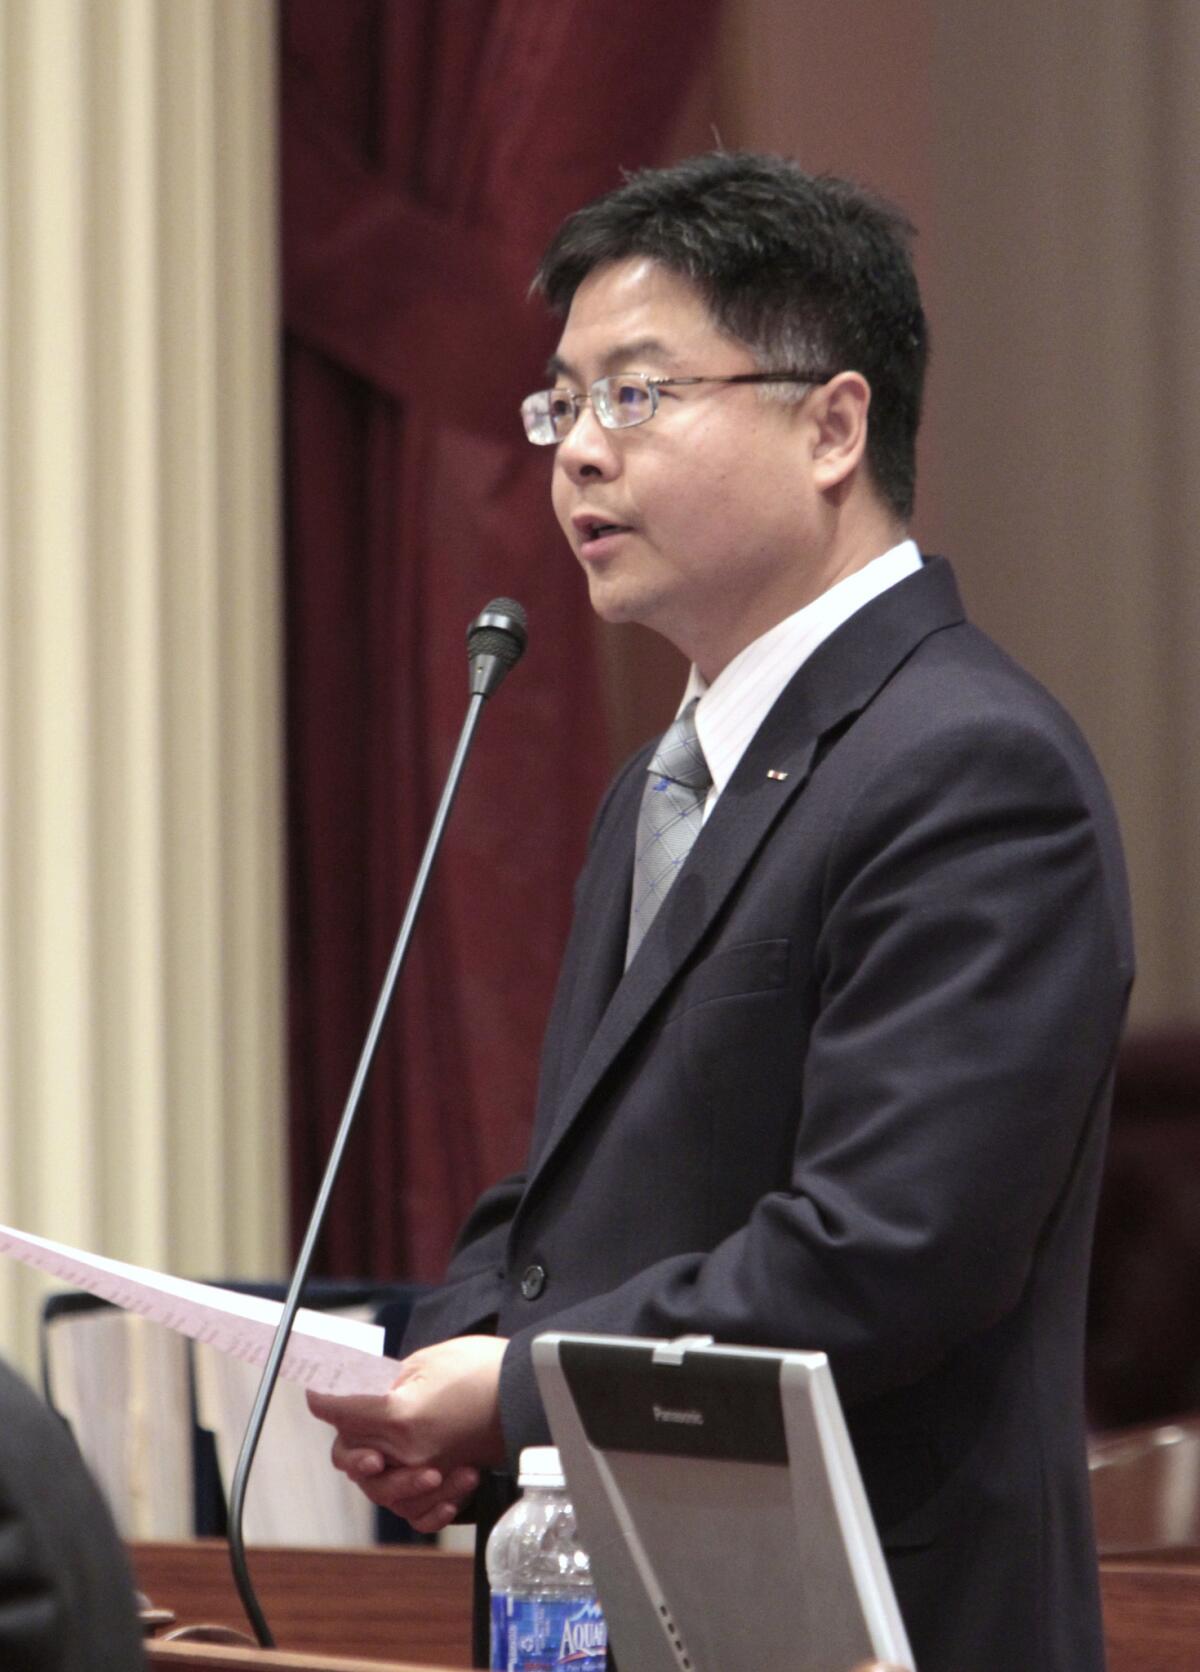 State Sen. Ted Lieu (D-Torrance) proposed Monday to limit state involvement in warrantless National Security Agency spying.